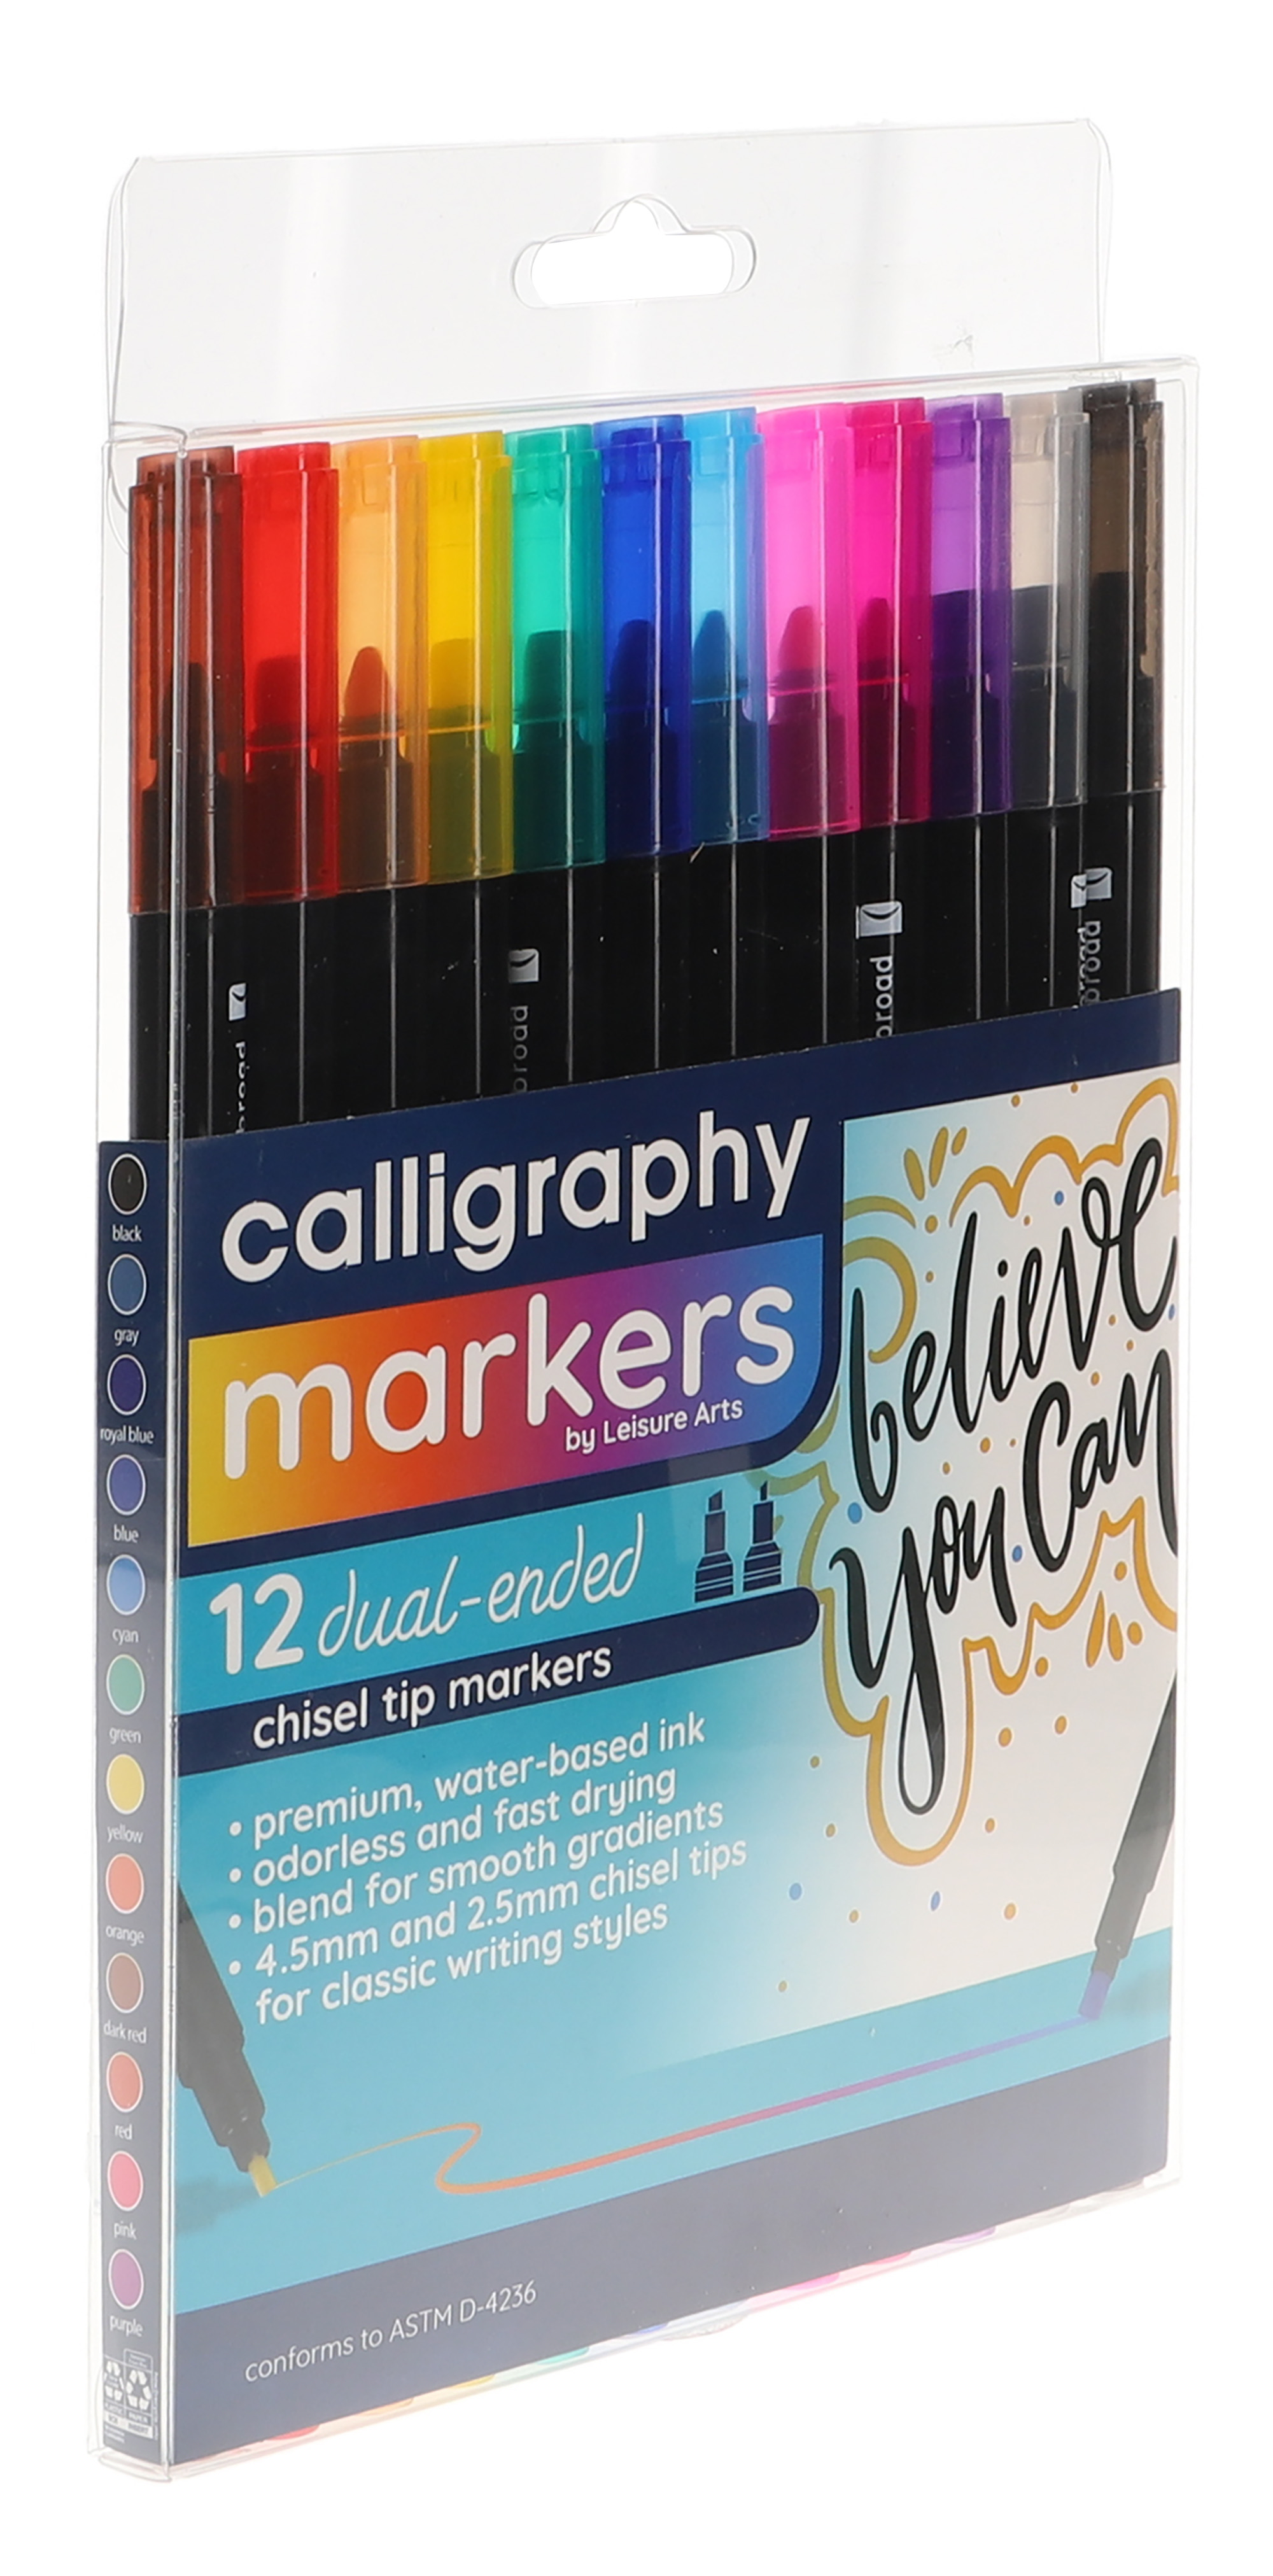 Picture Of Calligraphy Marker Pen